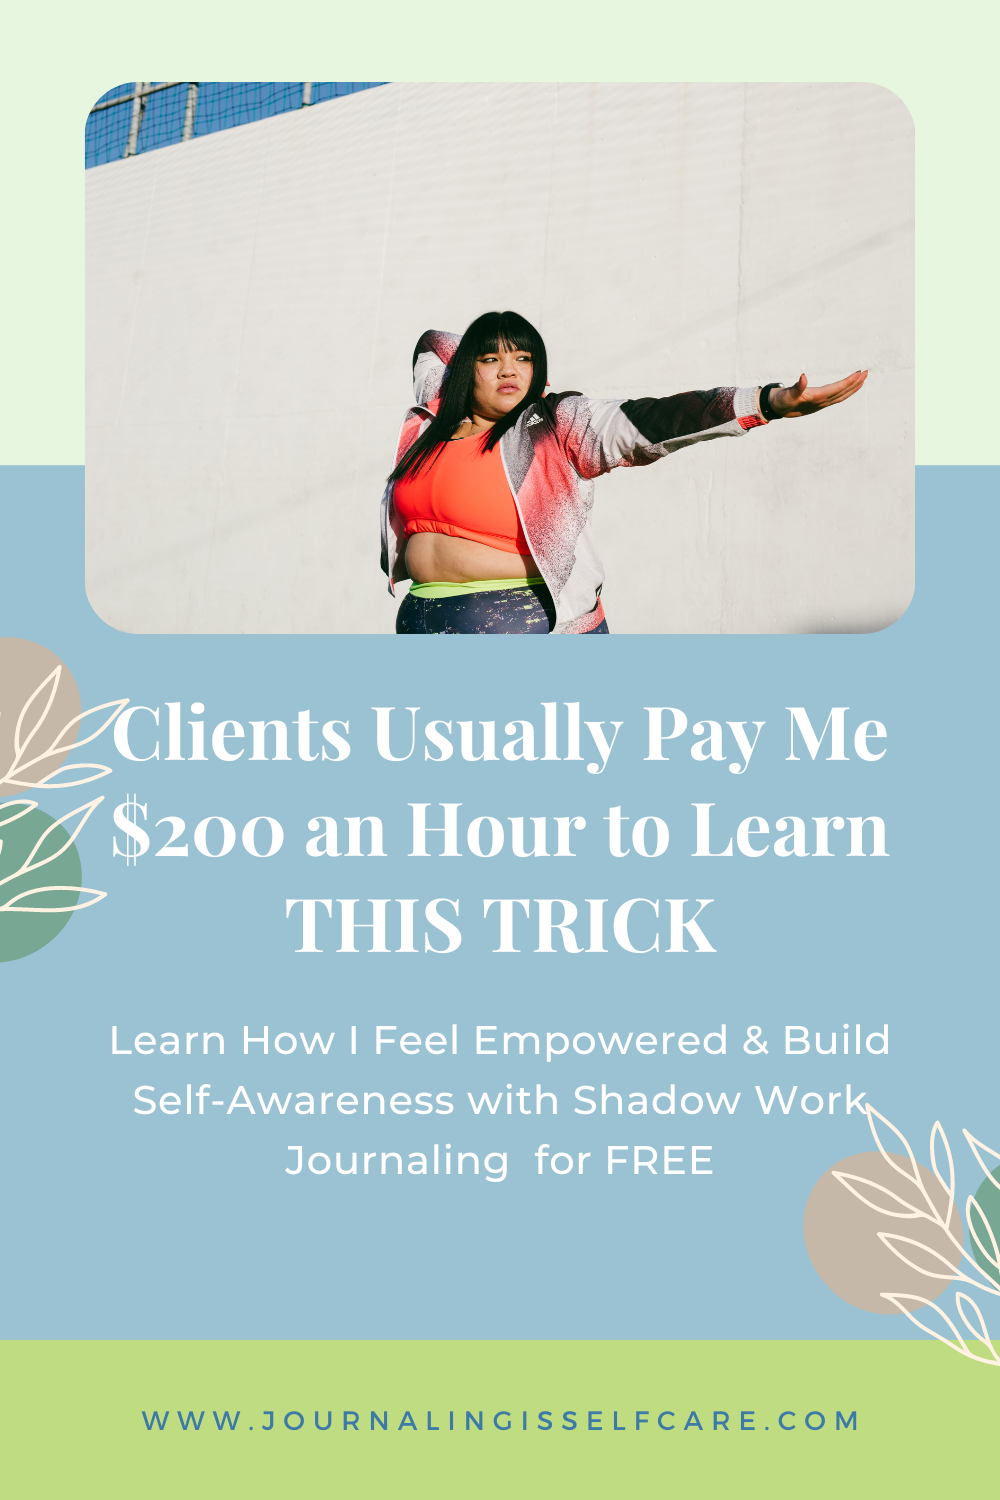 Clients Usually Pay Me $200 an Hour to Learn THIS TRICK to Feel Empowered and Build Self-Awareness with Shadow Work Journaling, But You Can Have it for FREE